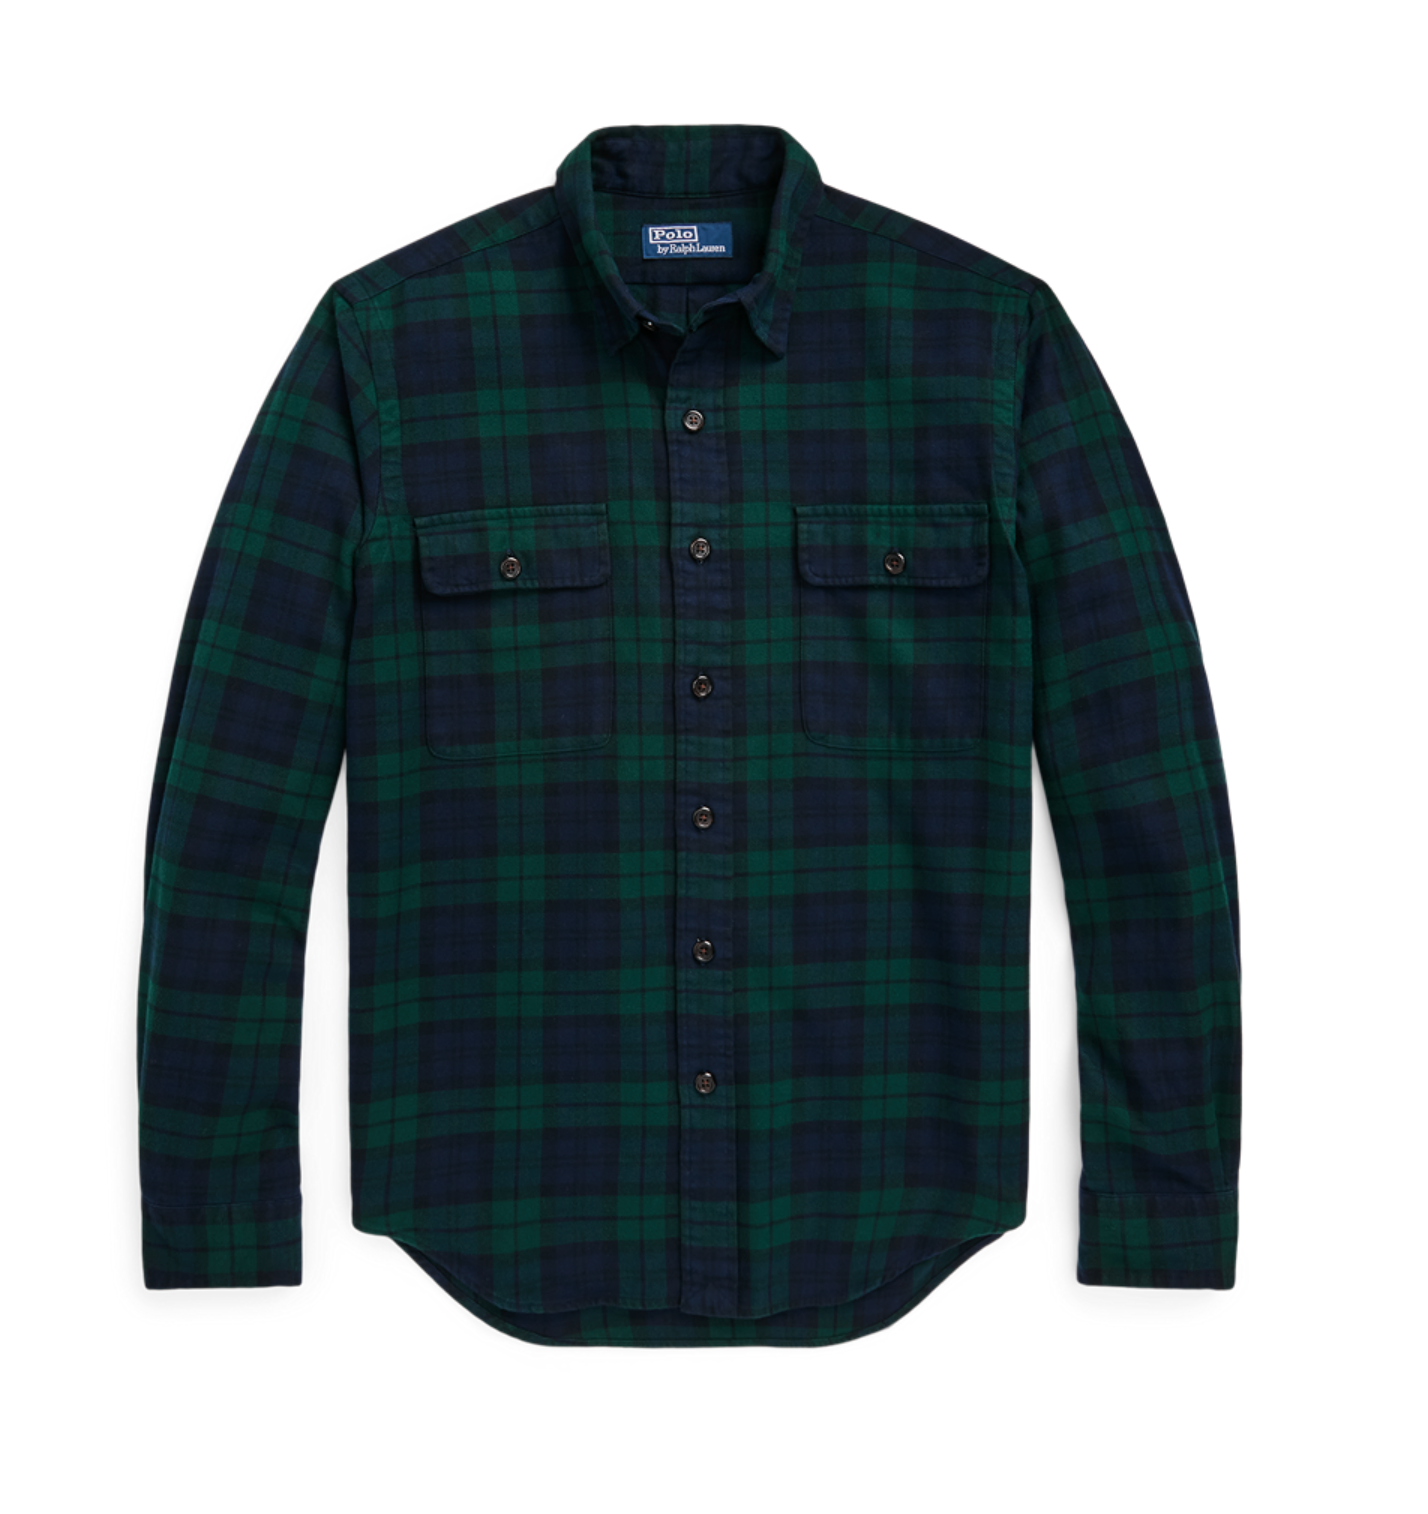 LONG-SLEEVE SUEDED FLANNEL WHITFIELD WORK SHIRT W/ POCKETS